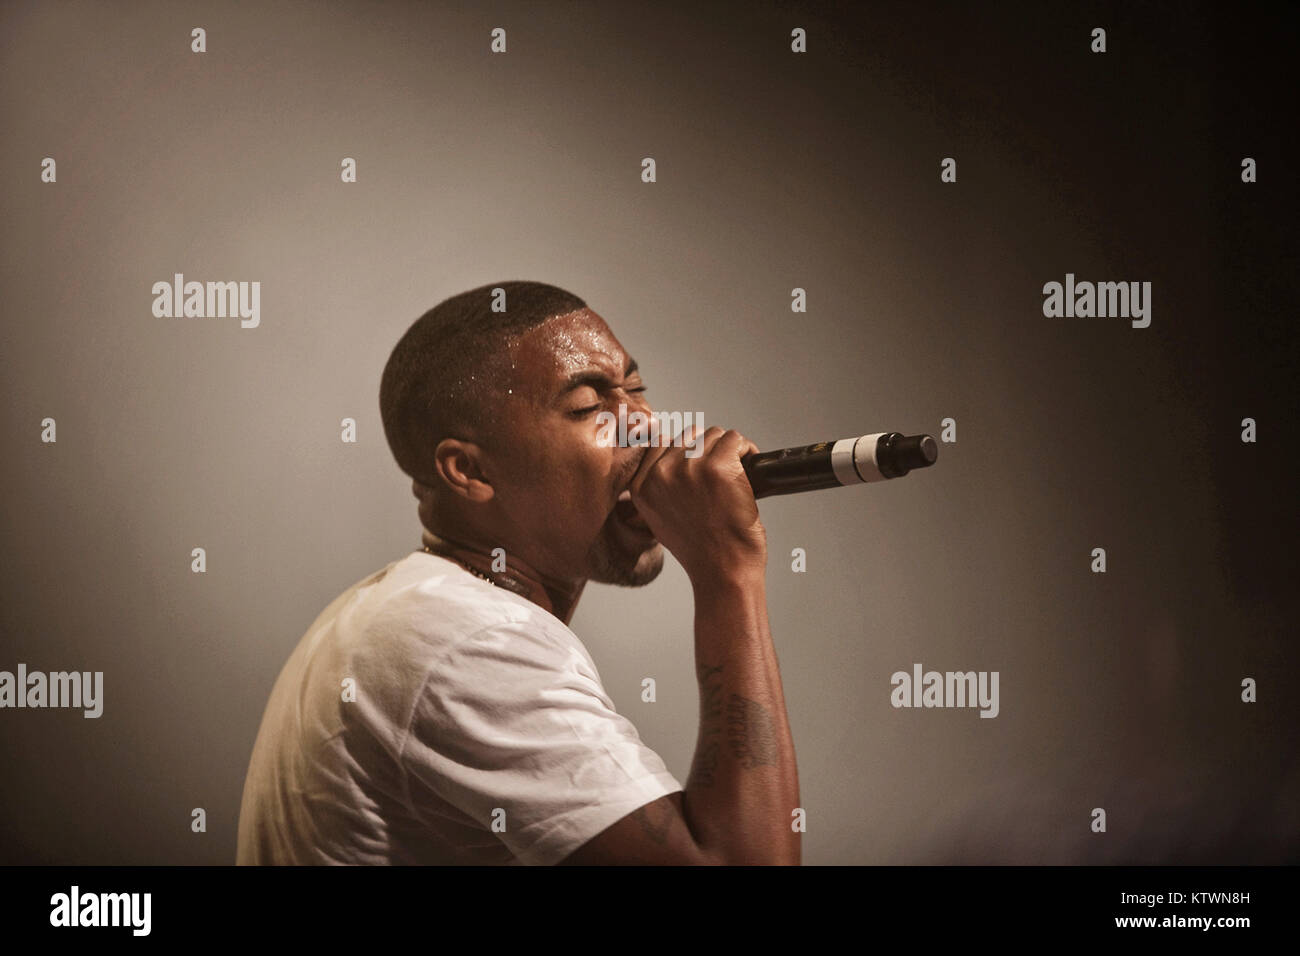 The American rapper Nas (pictured) and the Jamaican reggae artist Damian Marley released the common album ‘Distant Relatives’ and are here pictured at a live concert at Vega in Copenhagen. Denmark 06/07 2010. Stock Photo